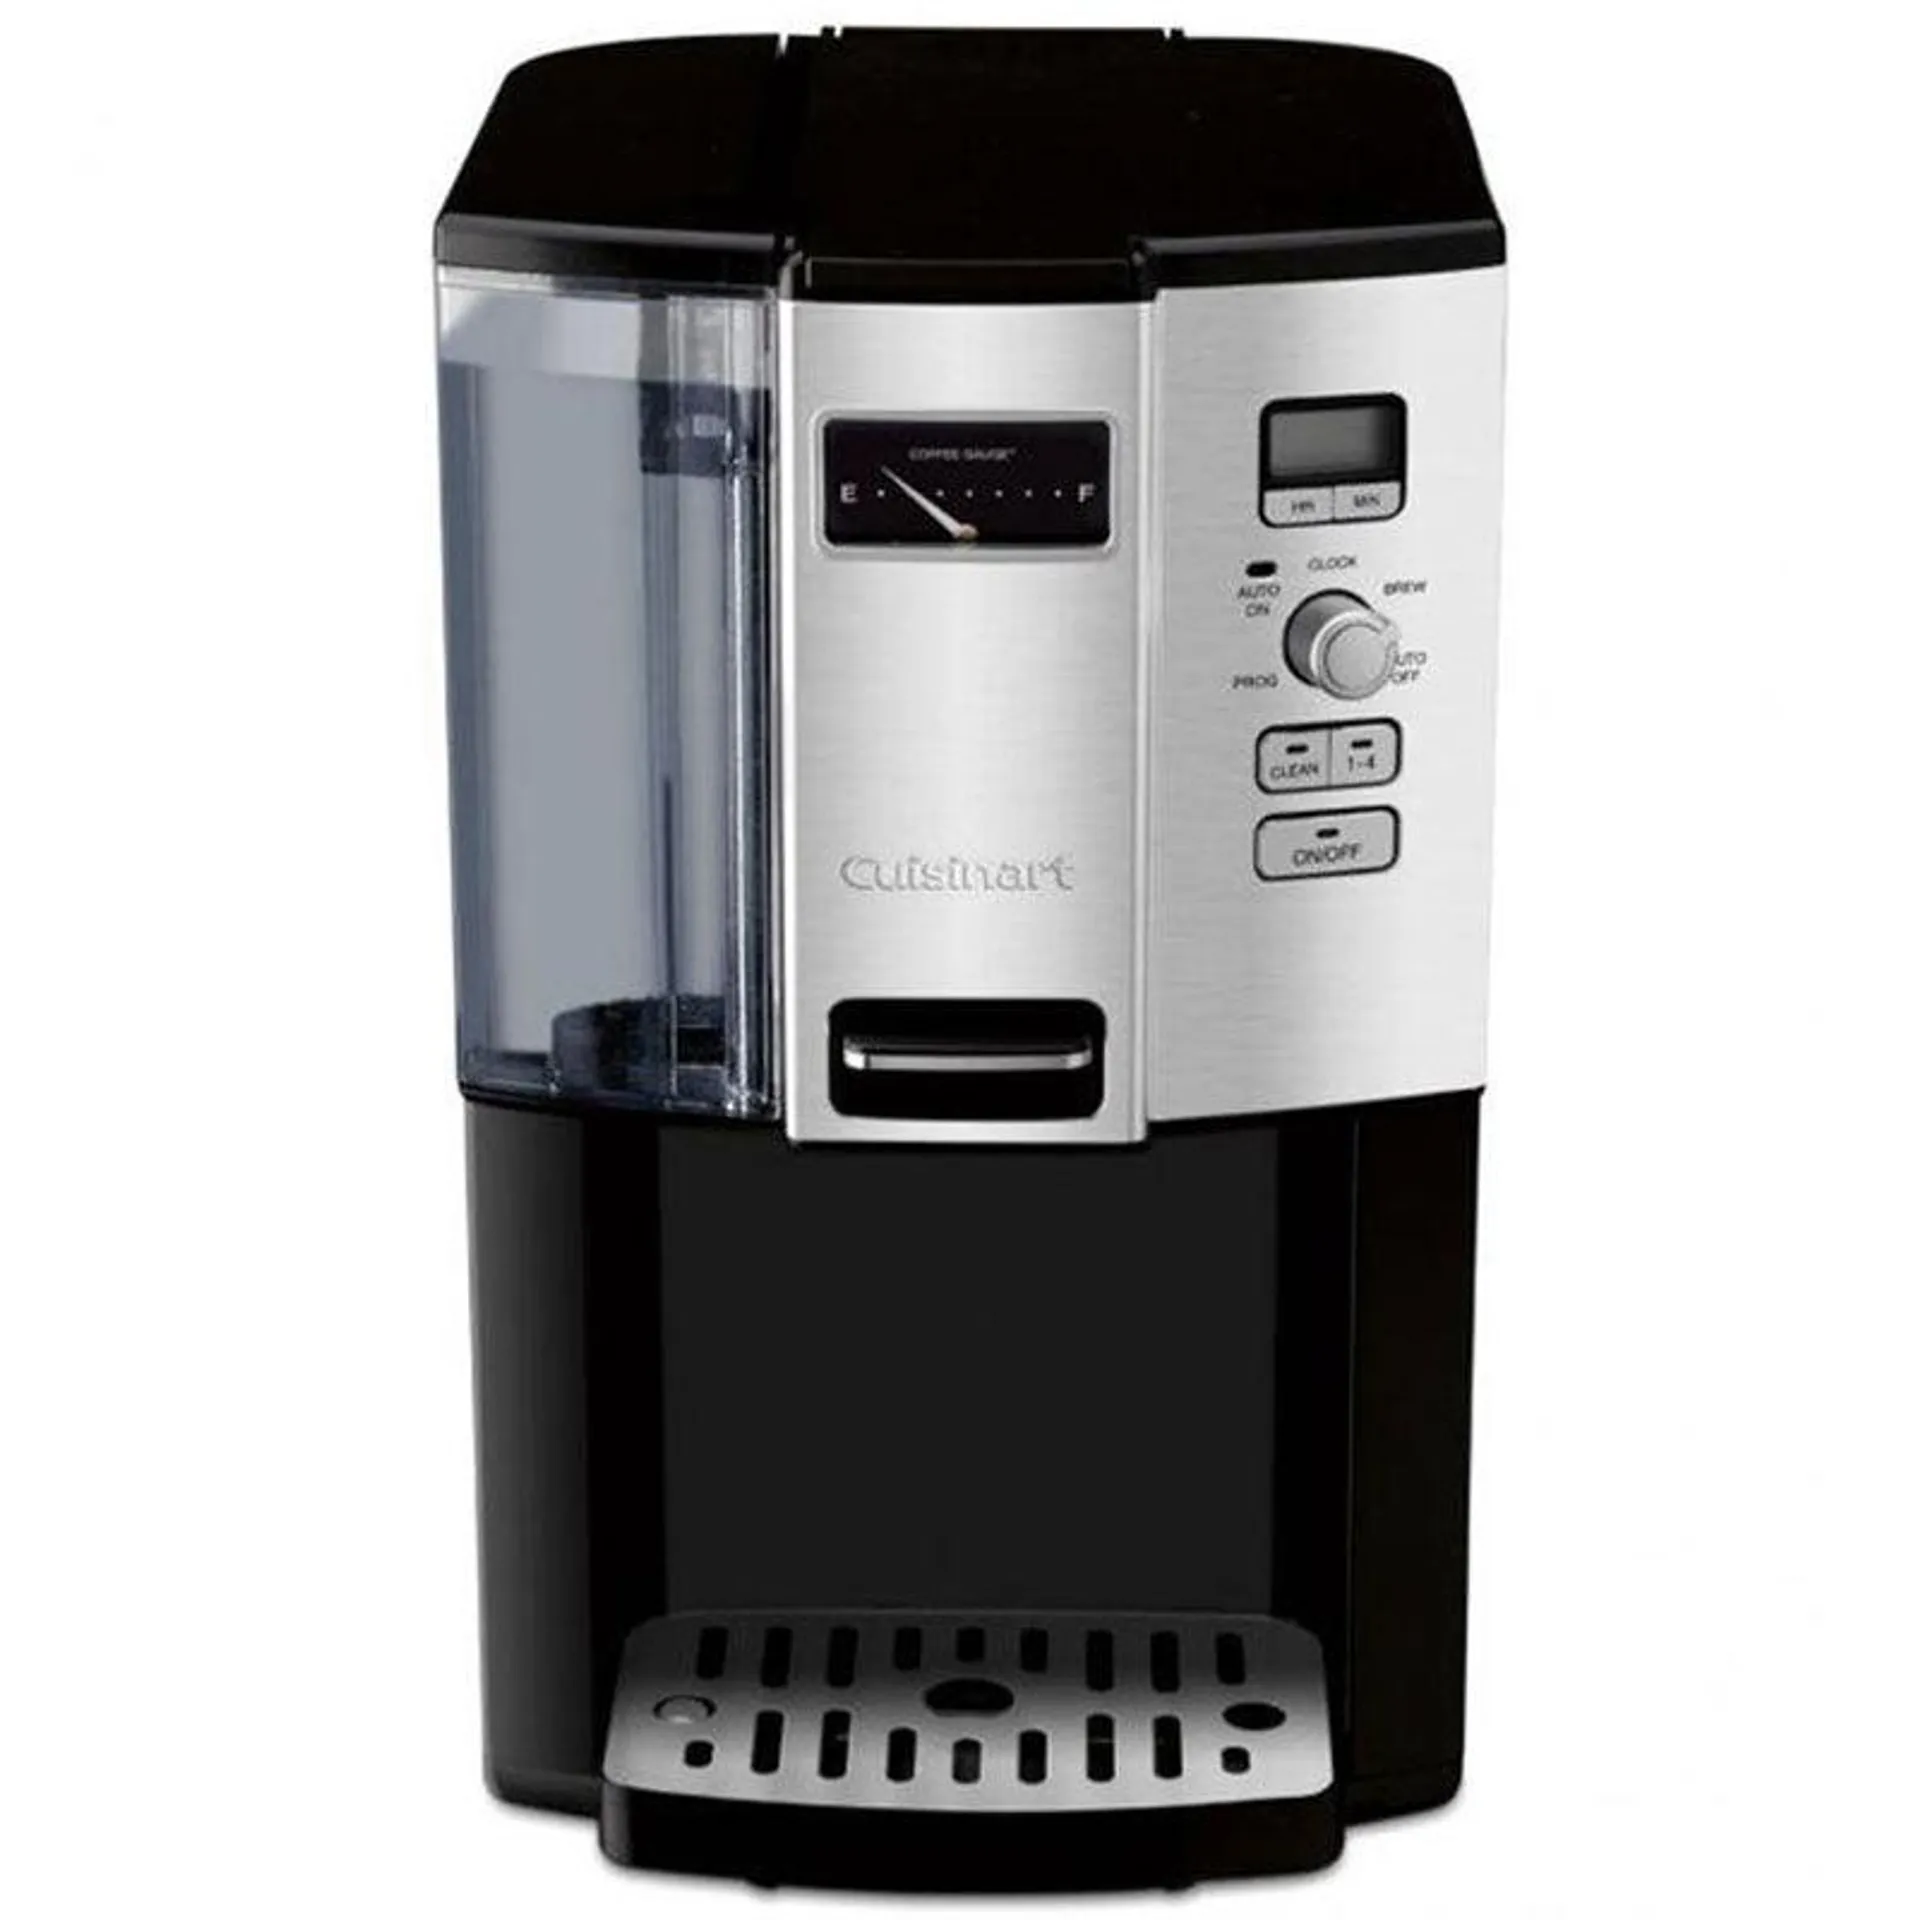 Cuisinart Coffee on Demand 12 Cup Programmable Coffeemaker - Black Stainless